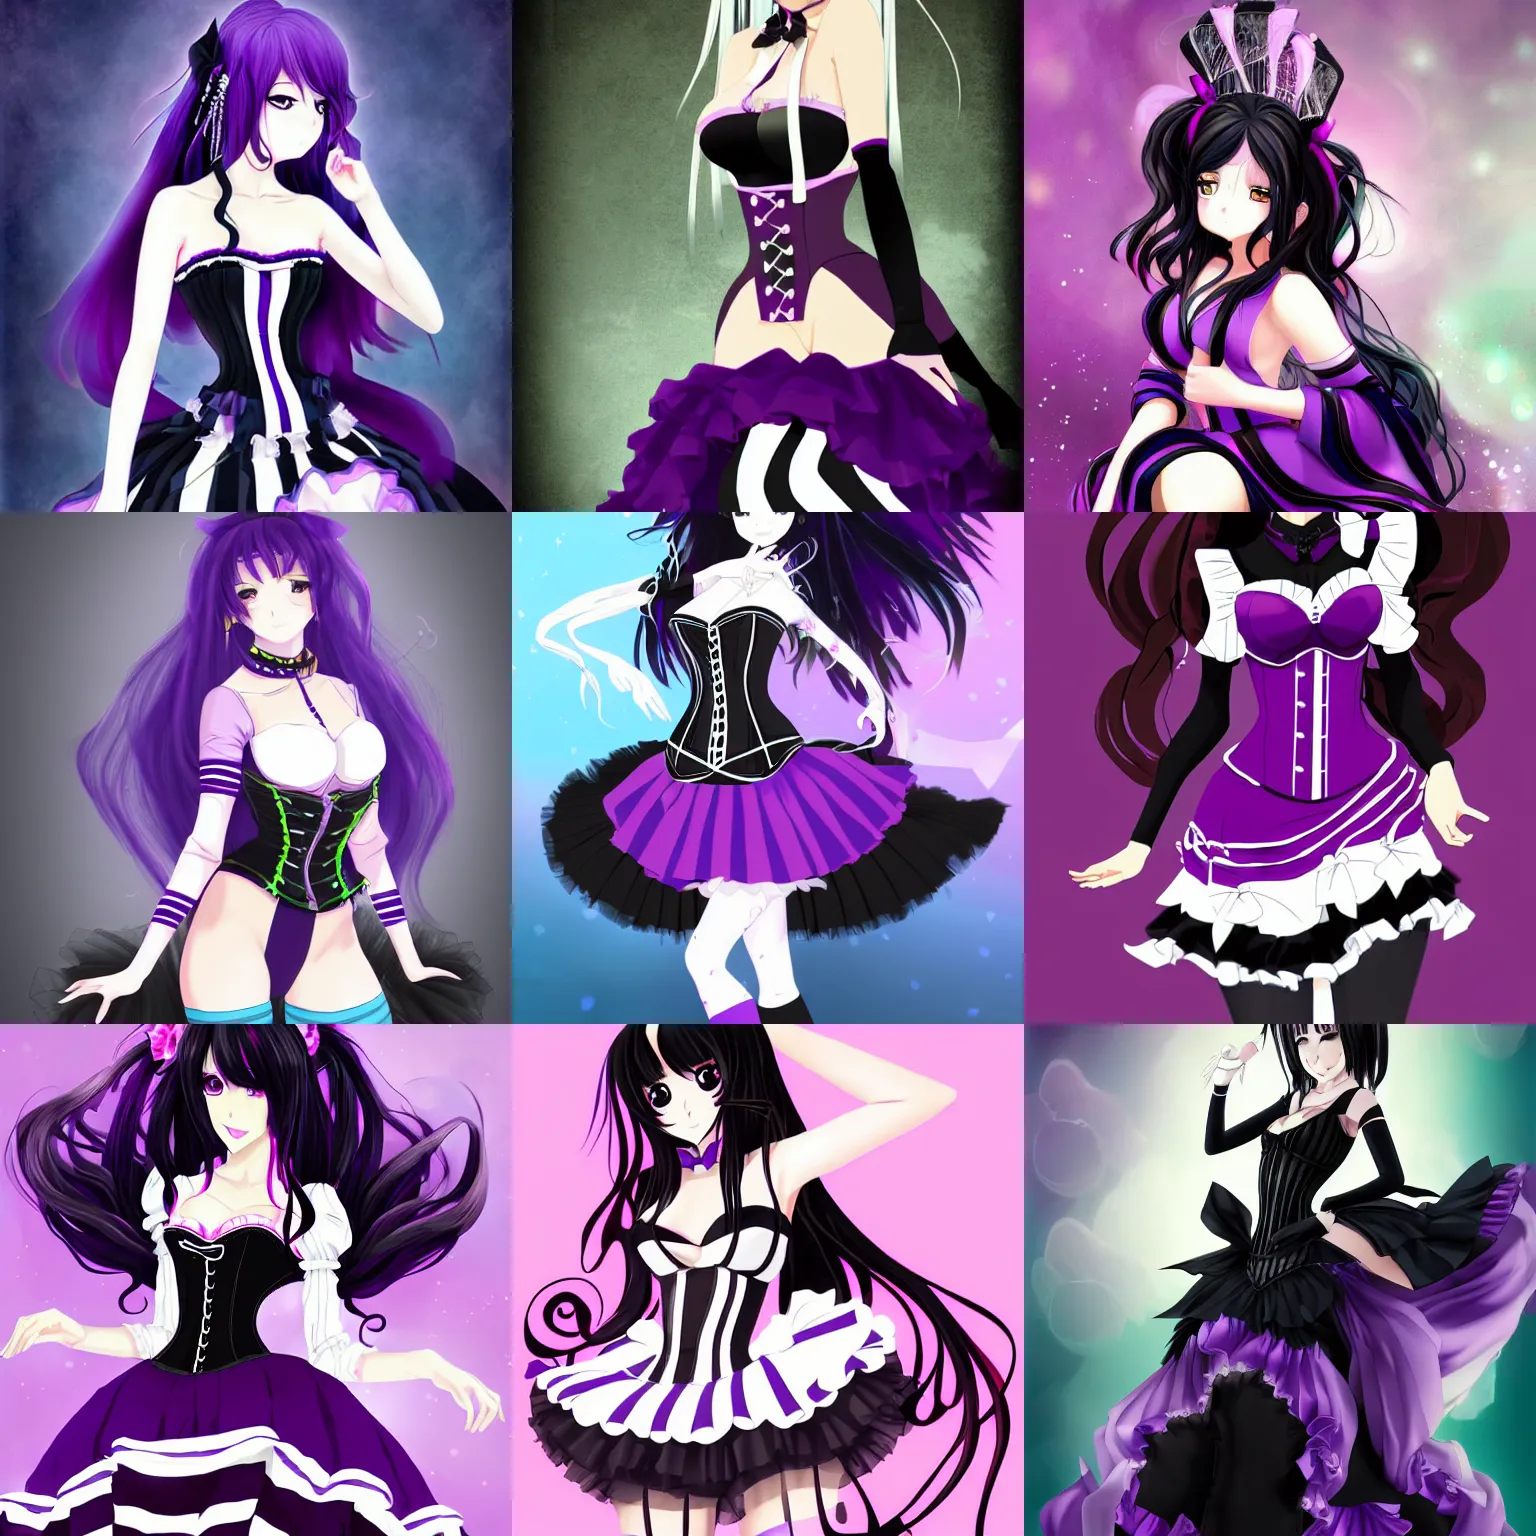 Prompt: a beautiful anime woman with long black hair, wearing a black corset top, a purple tutu, black gloves and long purple socks with white stripes, digital art, fantasy art